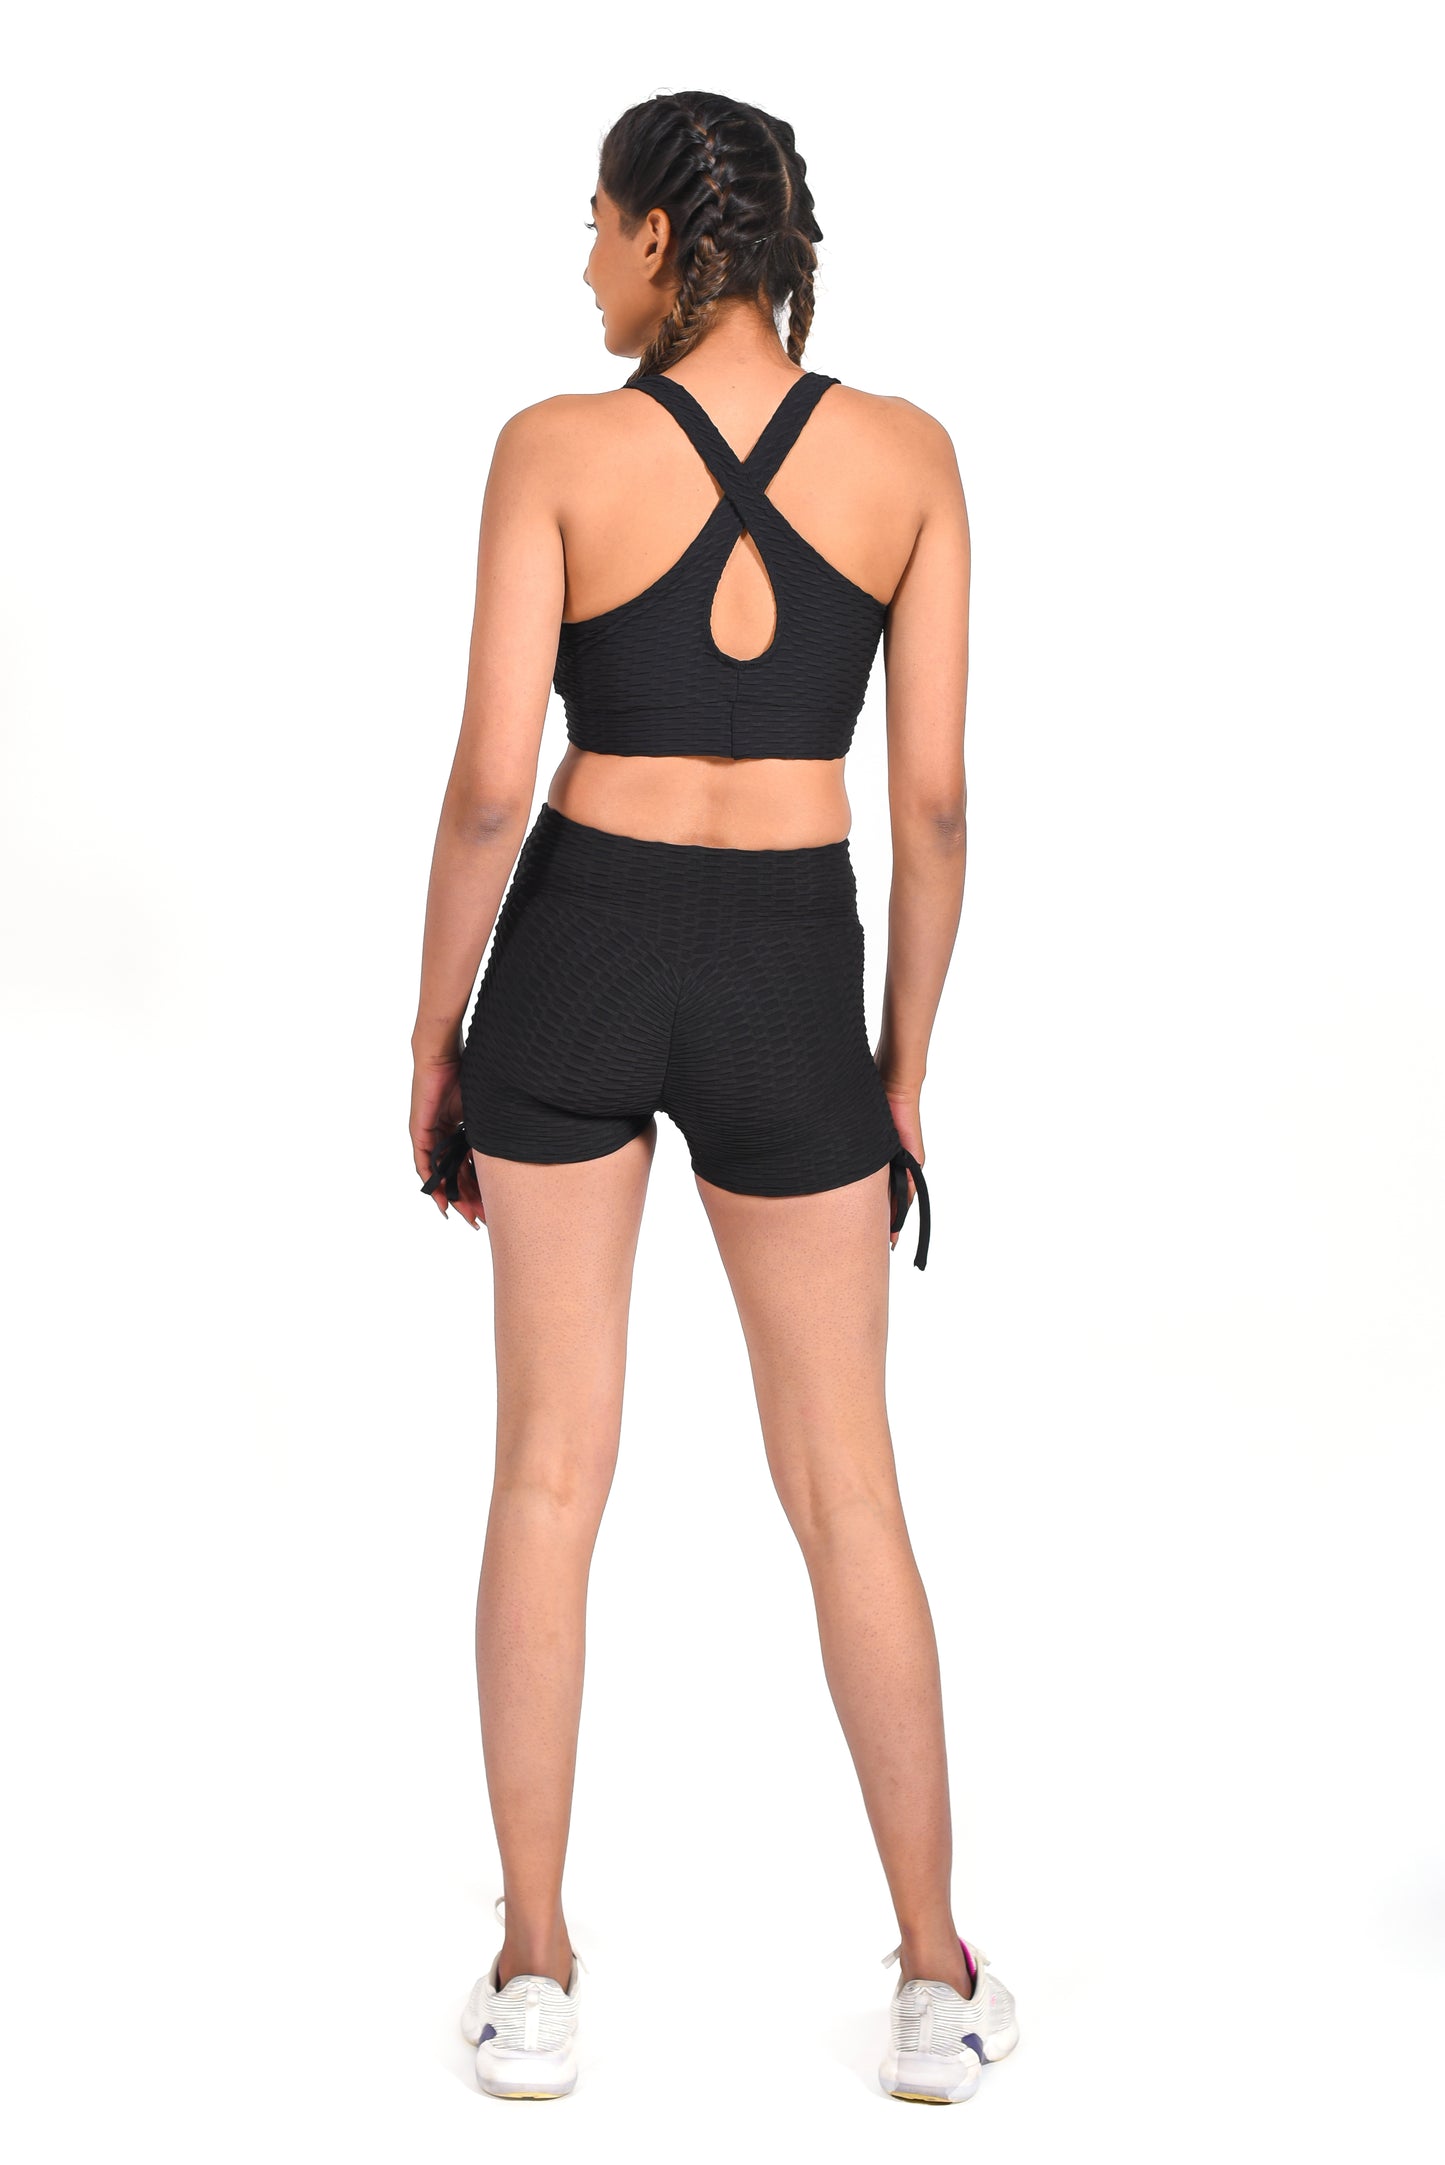 Buy Black Push Up Supportive Sports Bra Online